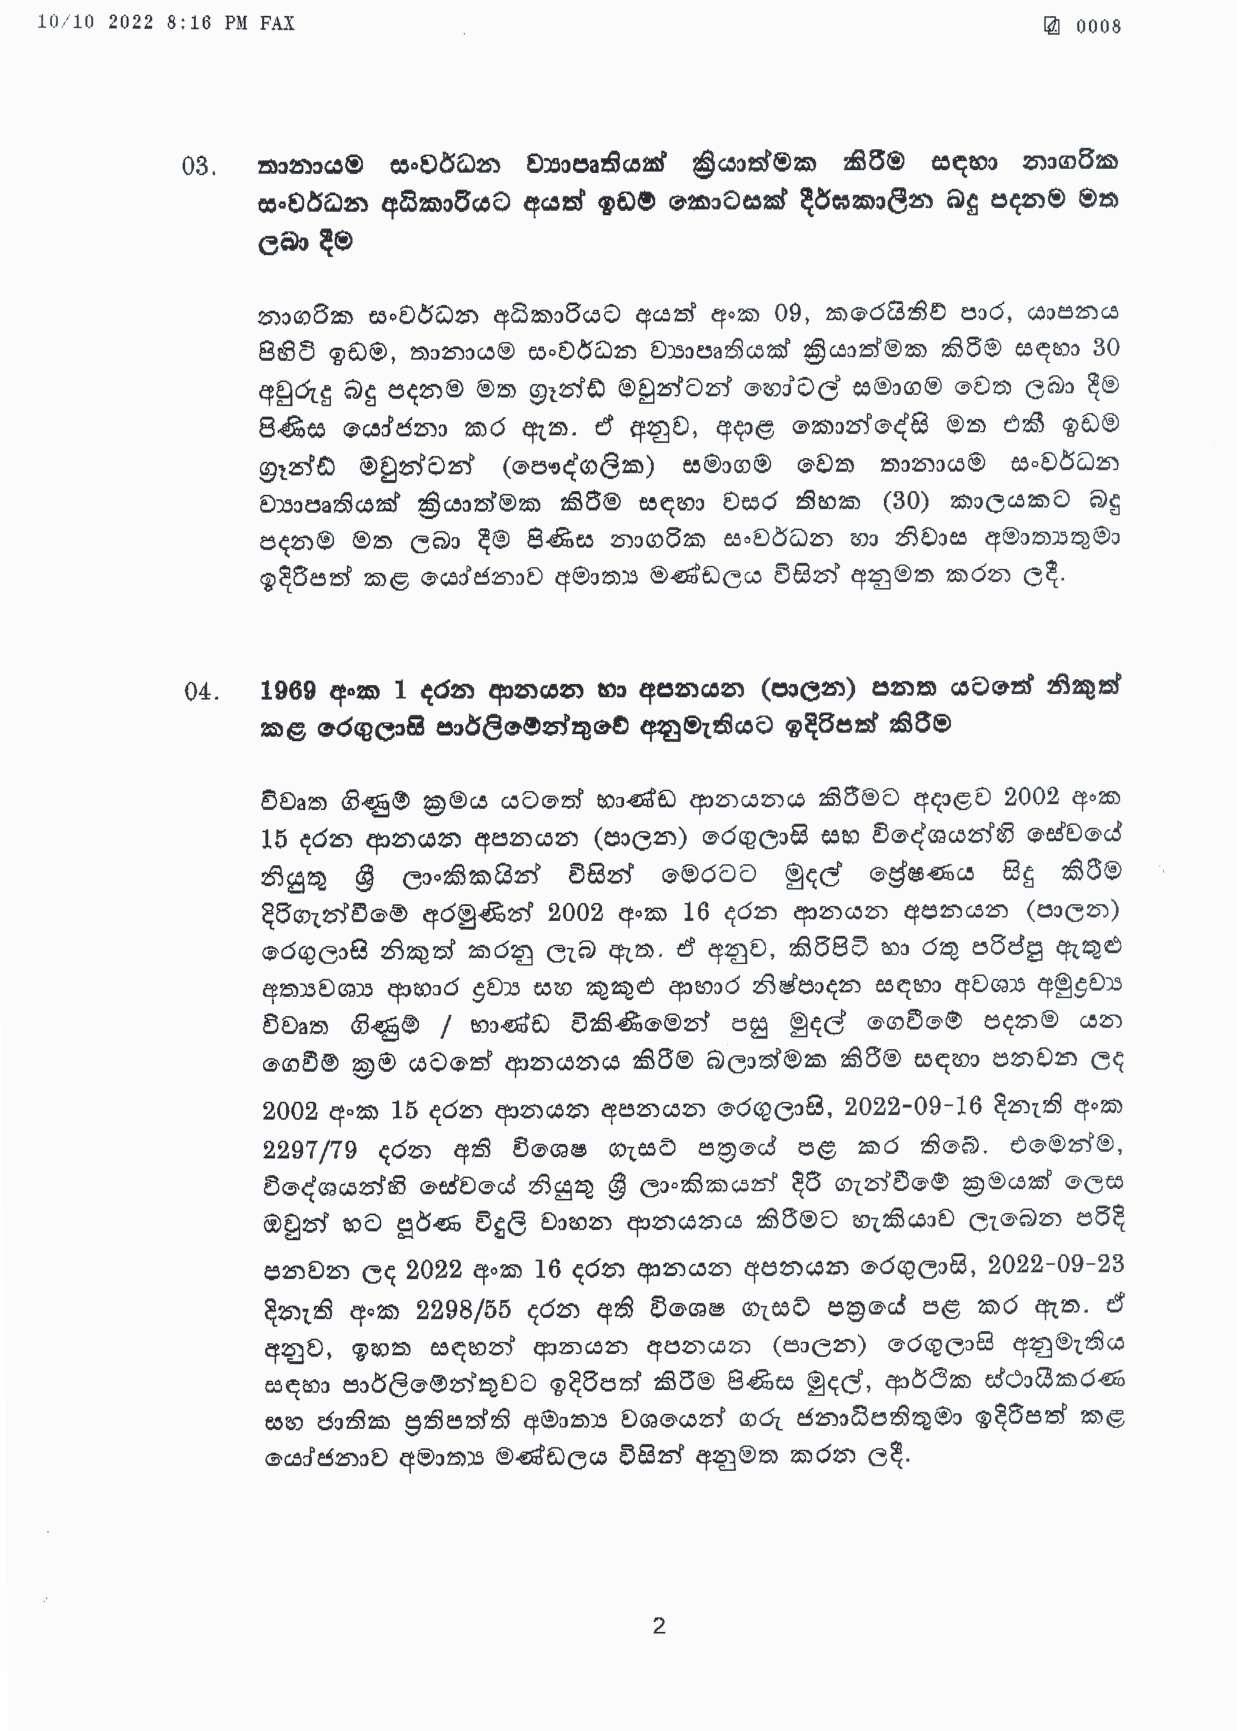 Cabinet Decision on 10.10.2022 page 002